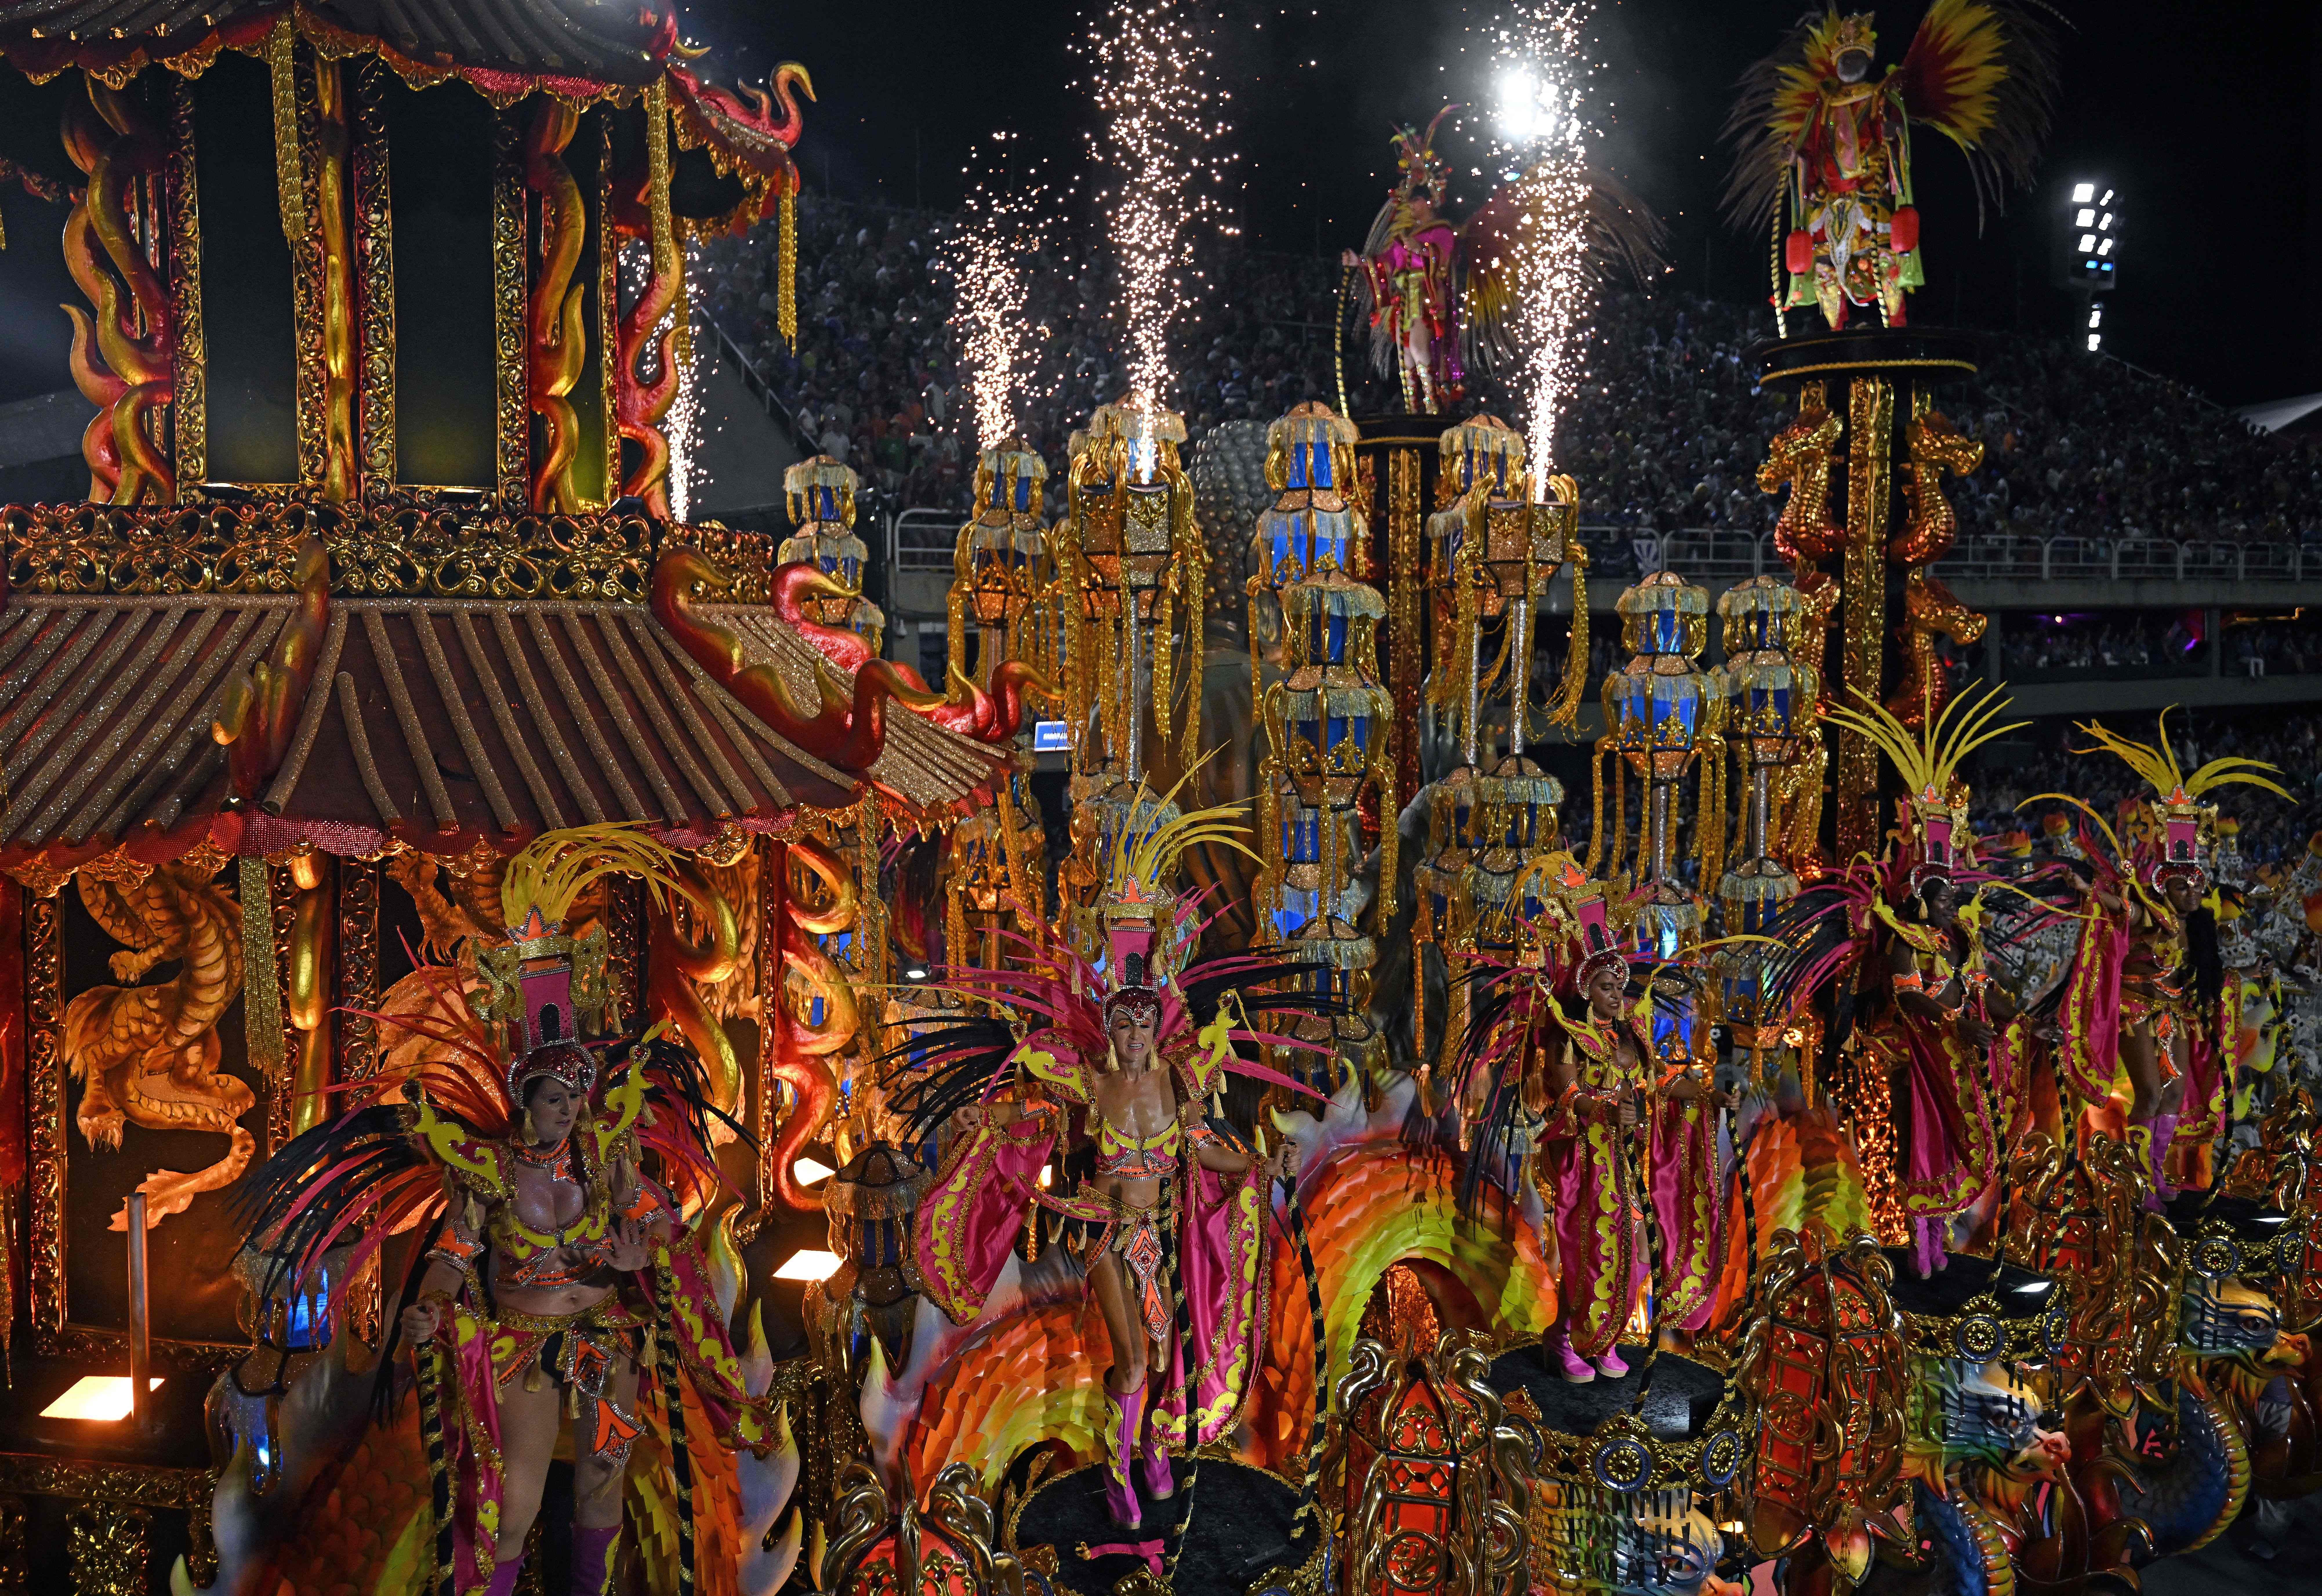 An elaborate and colorful parade float with dancers during Brazil's carnival